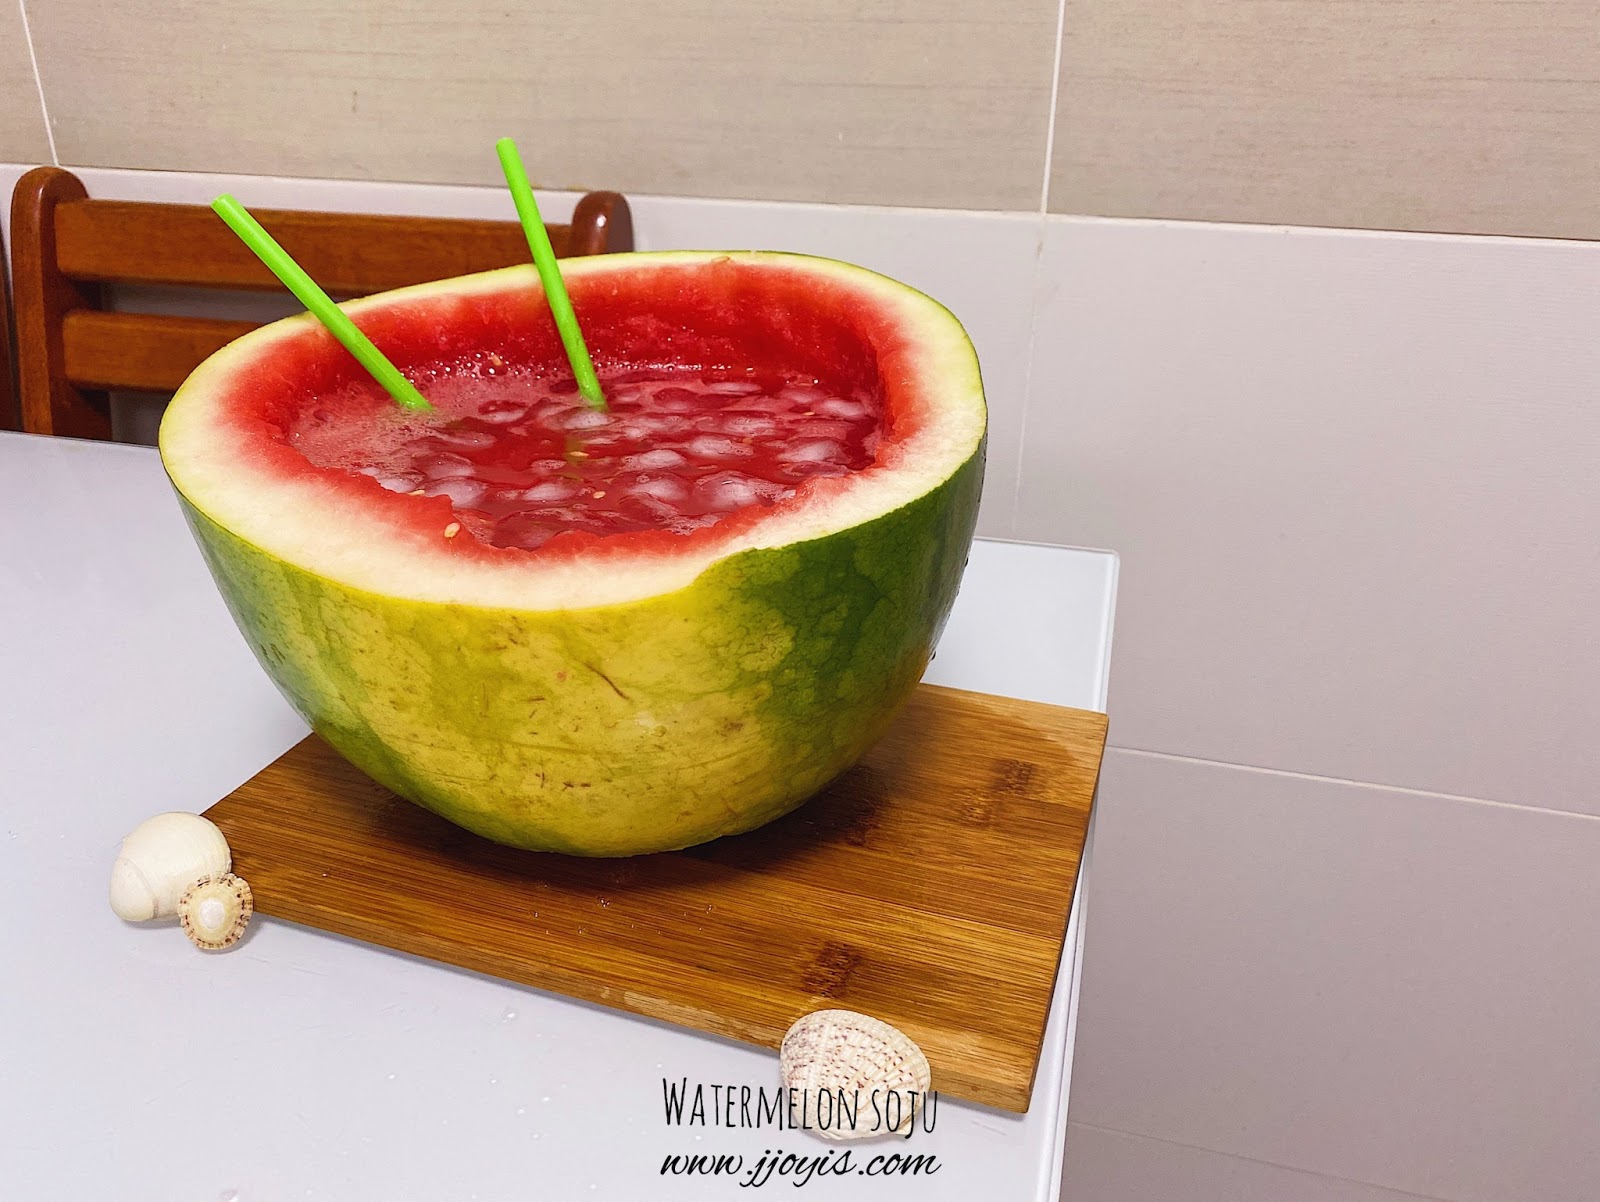 homemade, watermelon soju, unflavoured soju, watermelon vodka, easy recipe, subak soju, subak-soju, watermelon bowl, chilled, cold, ice